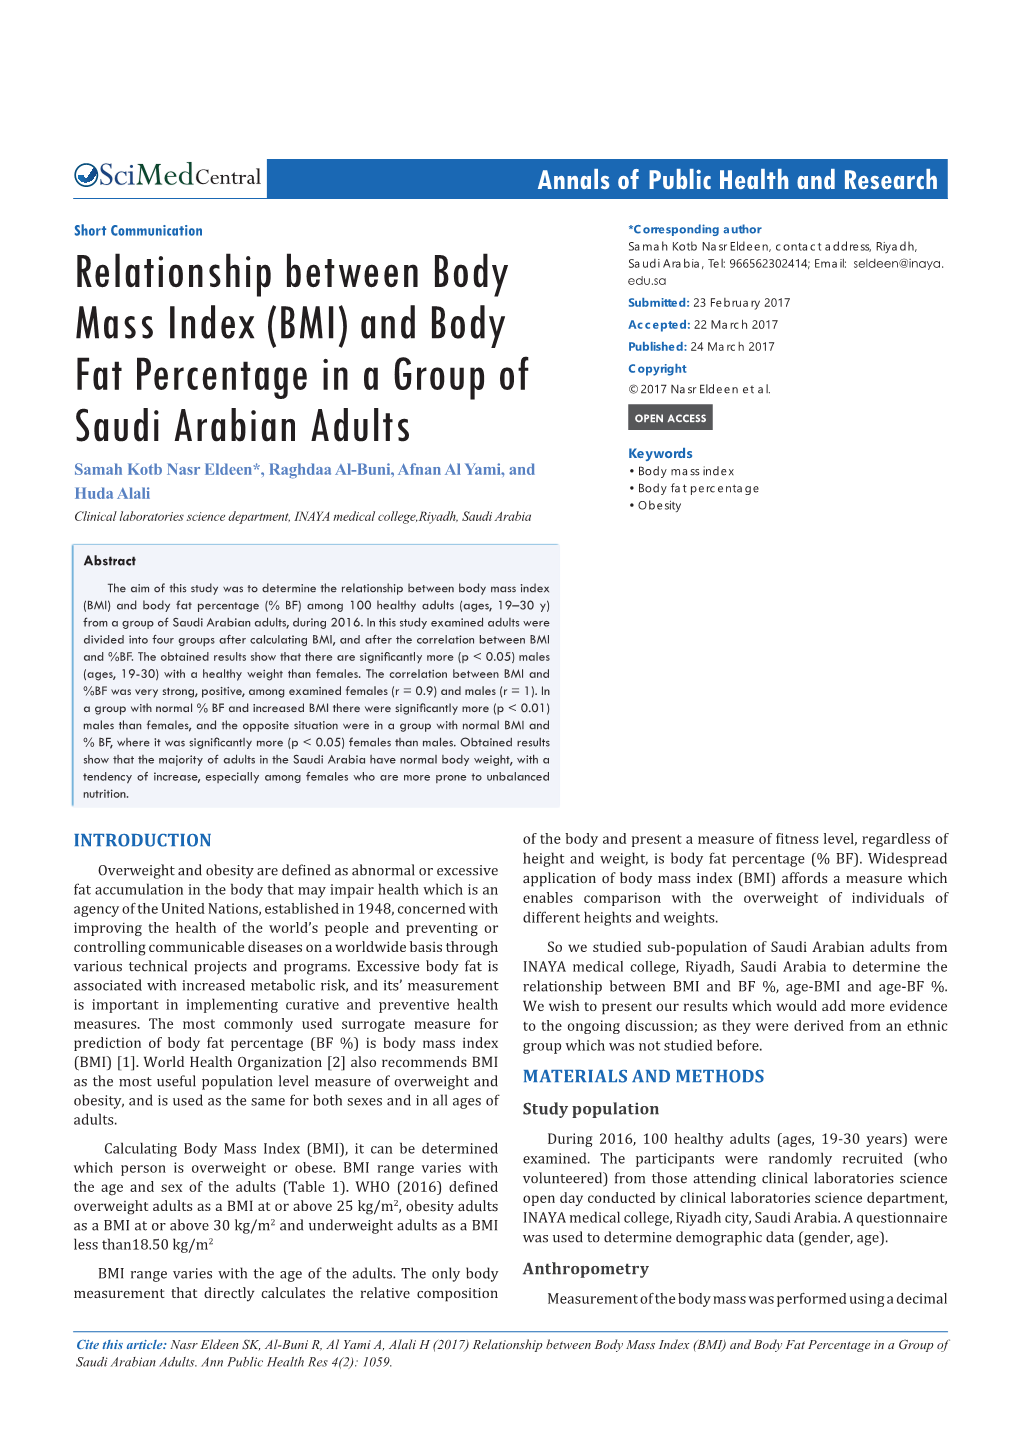 Relationship Between Body Mass Index (BMI) and Body Fat Percentage in a Group of Saudi Arabian Adults